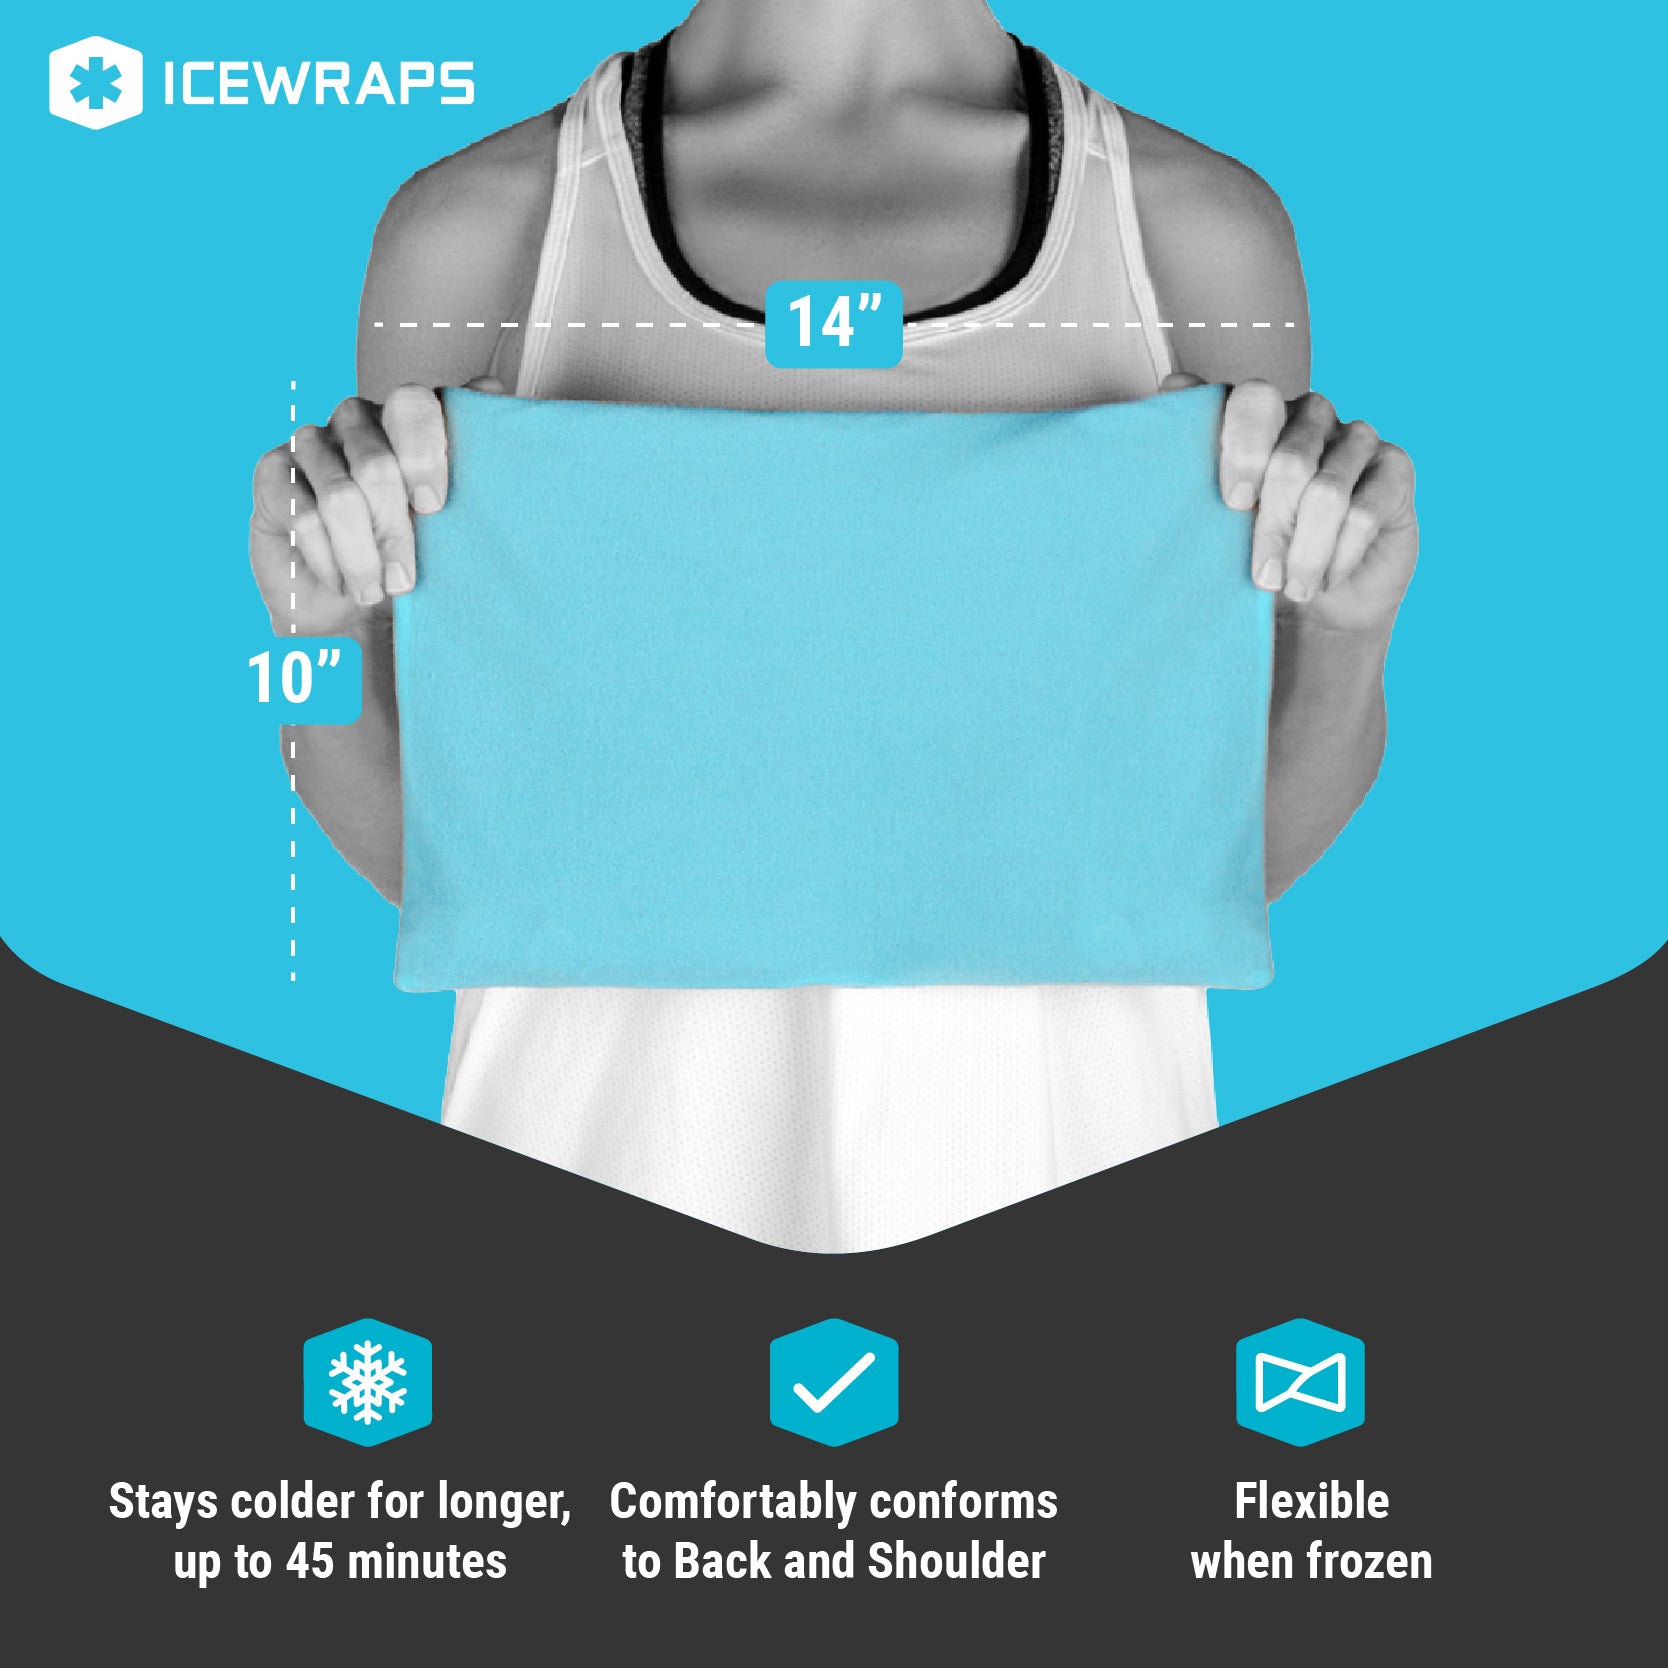 IceWraps 4 Round Reusable Hot/Cold Gel Pack with Cloth Backing, 5 Pack